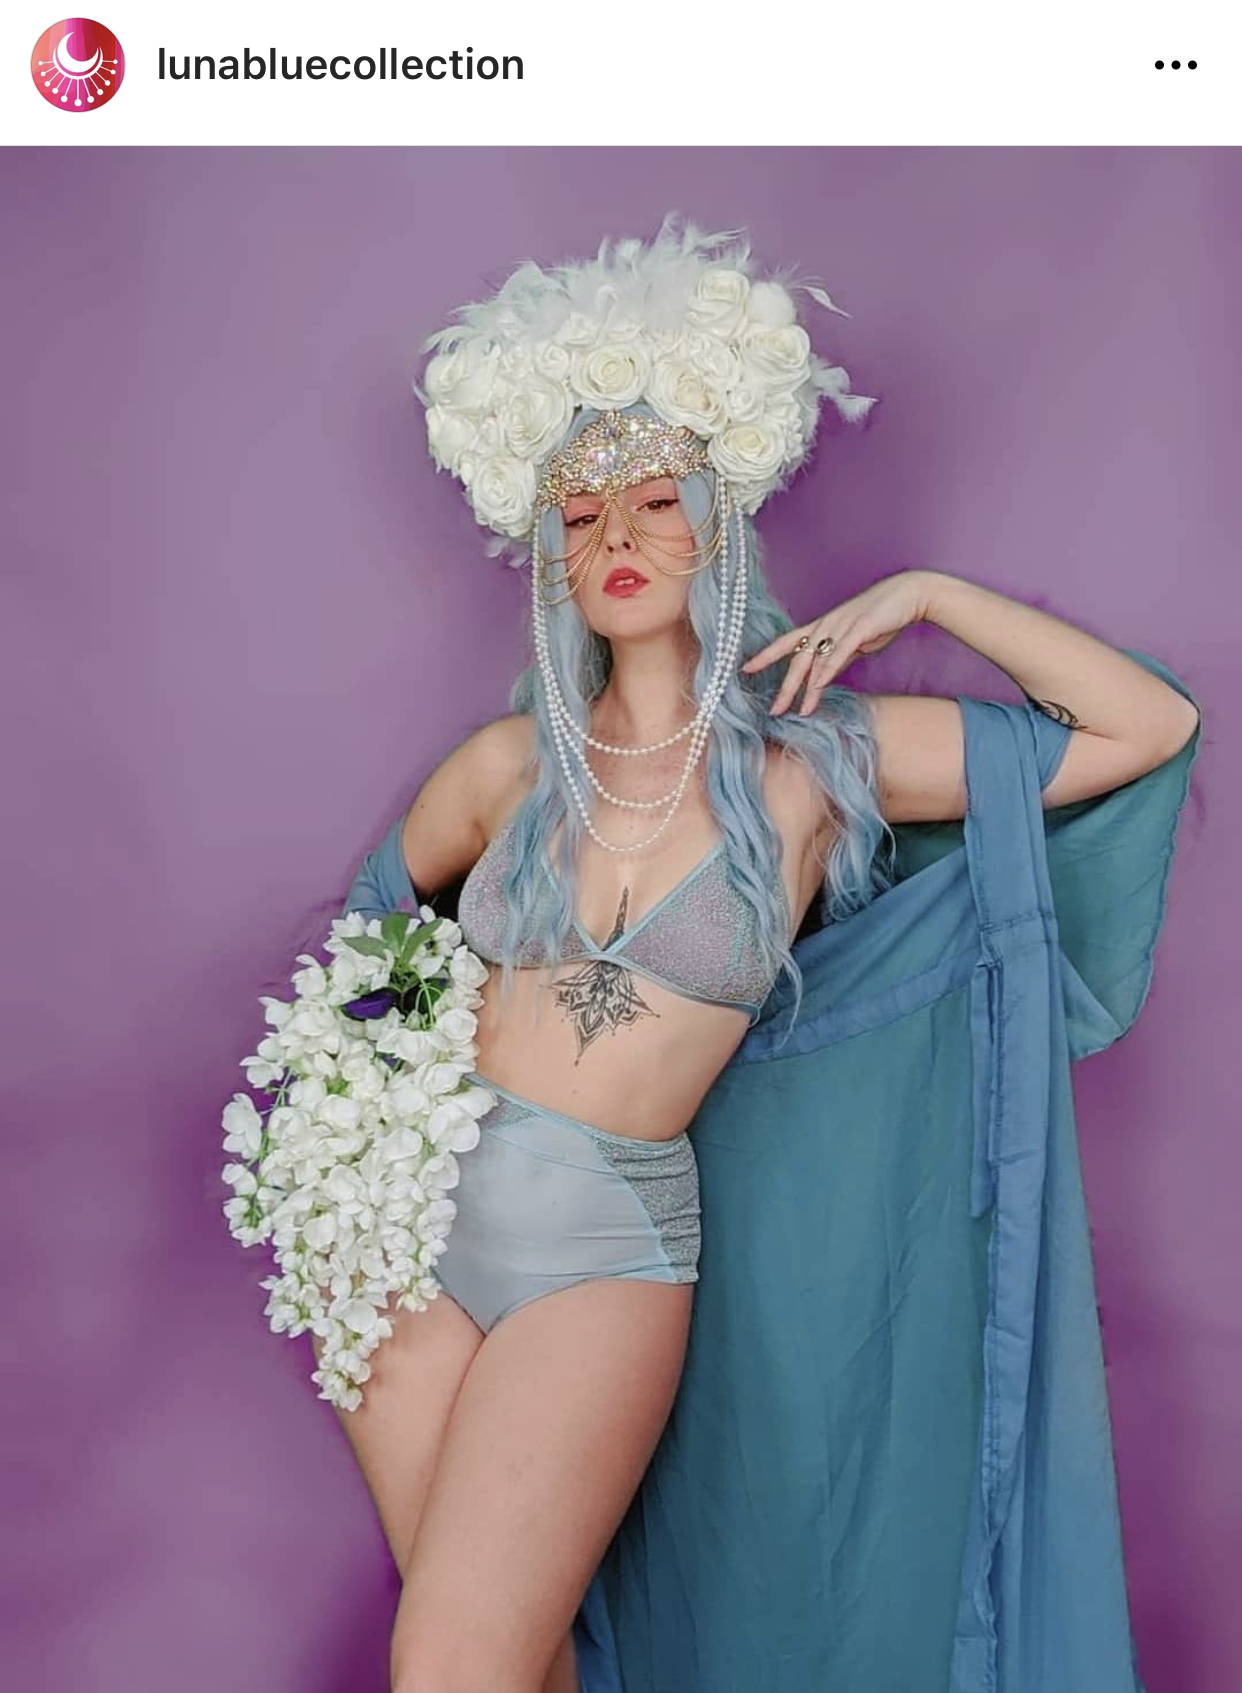 Image shows a woman in a blue festival two piece holding white flowers and wearing a white LED headdress.